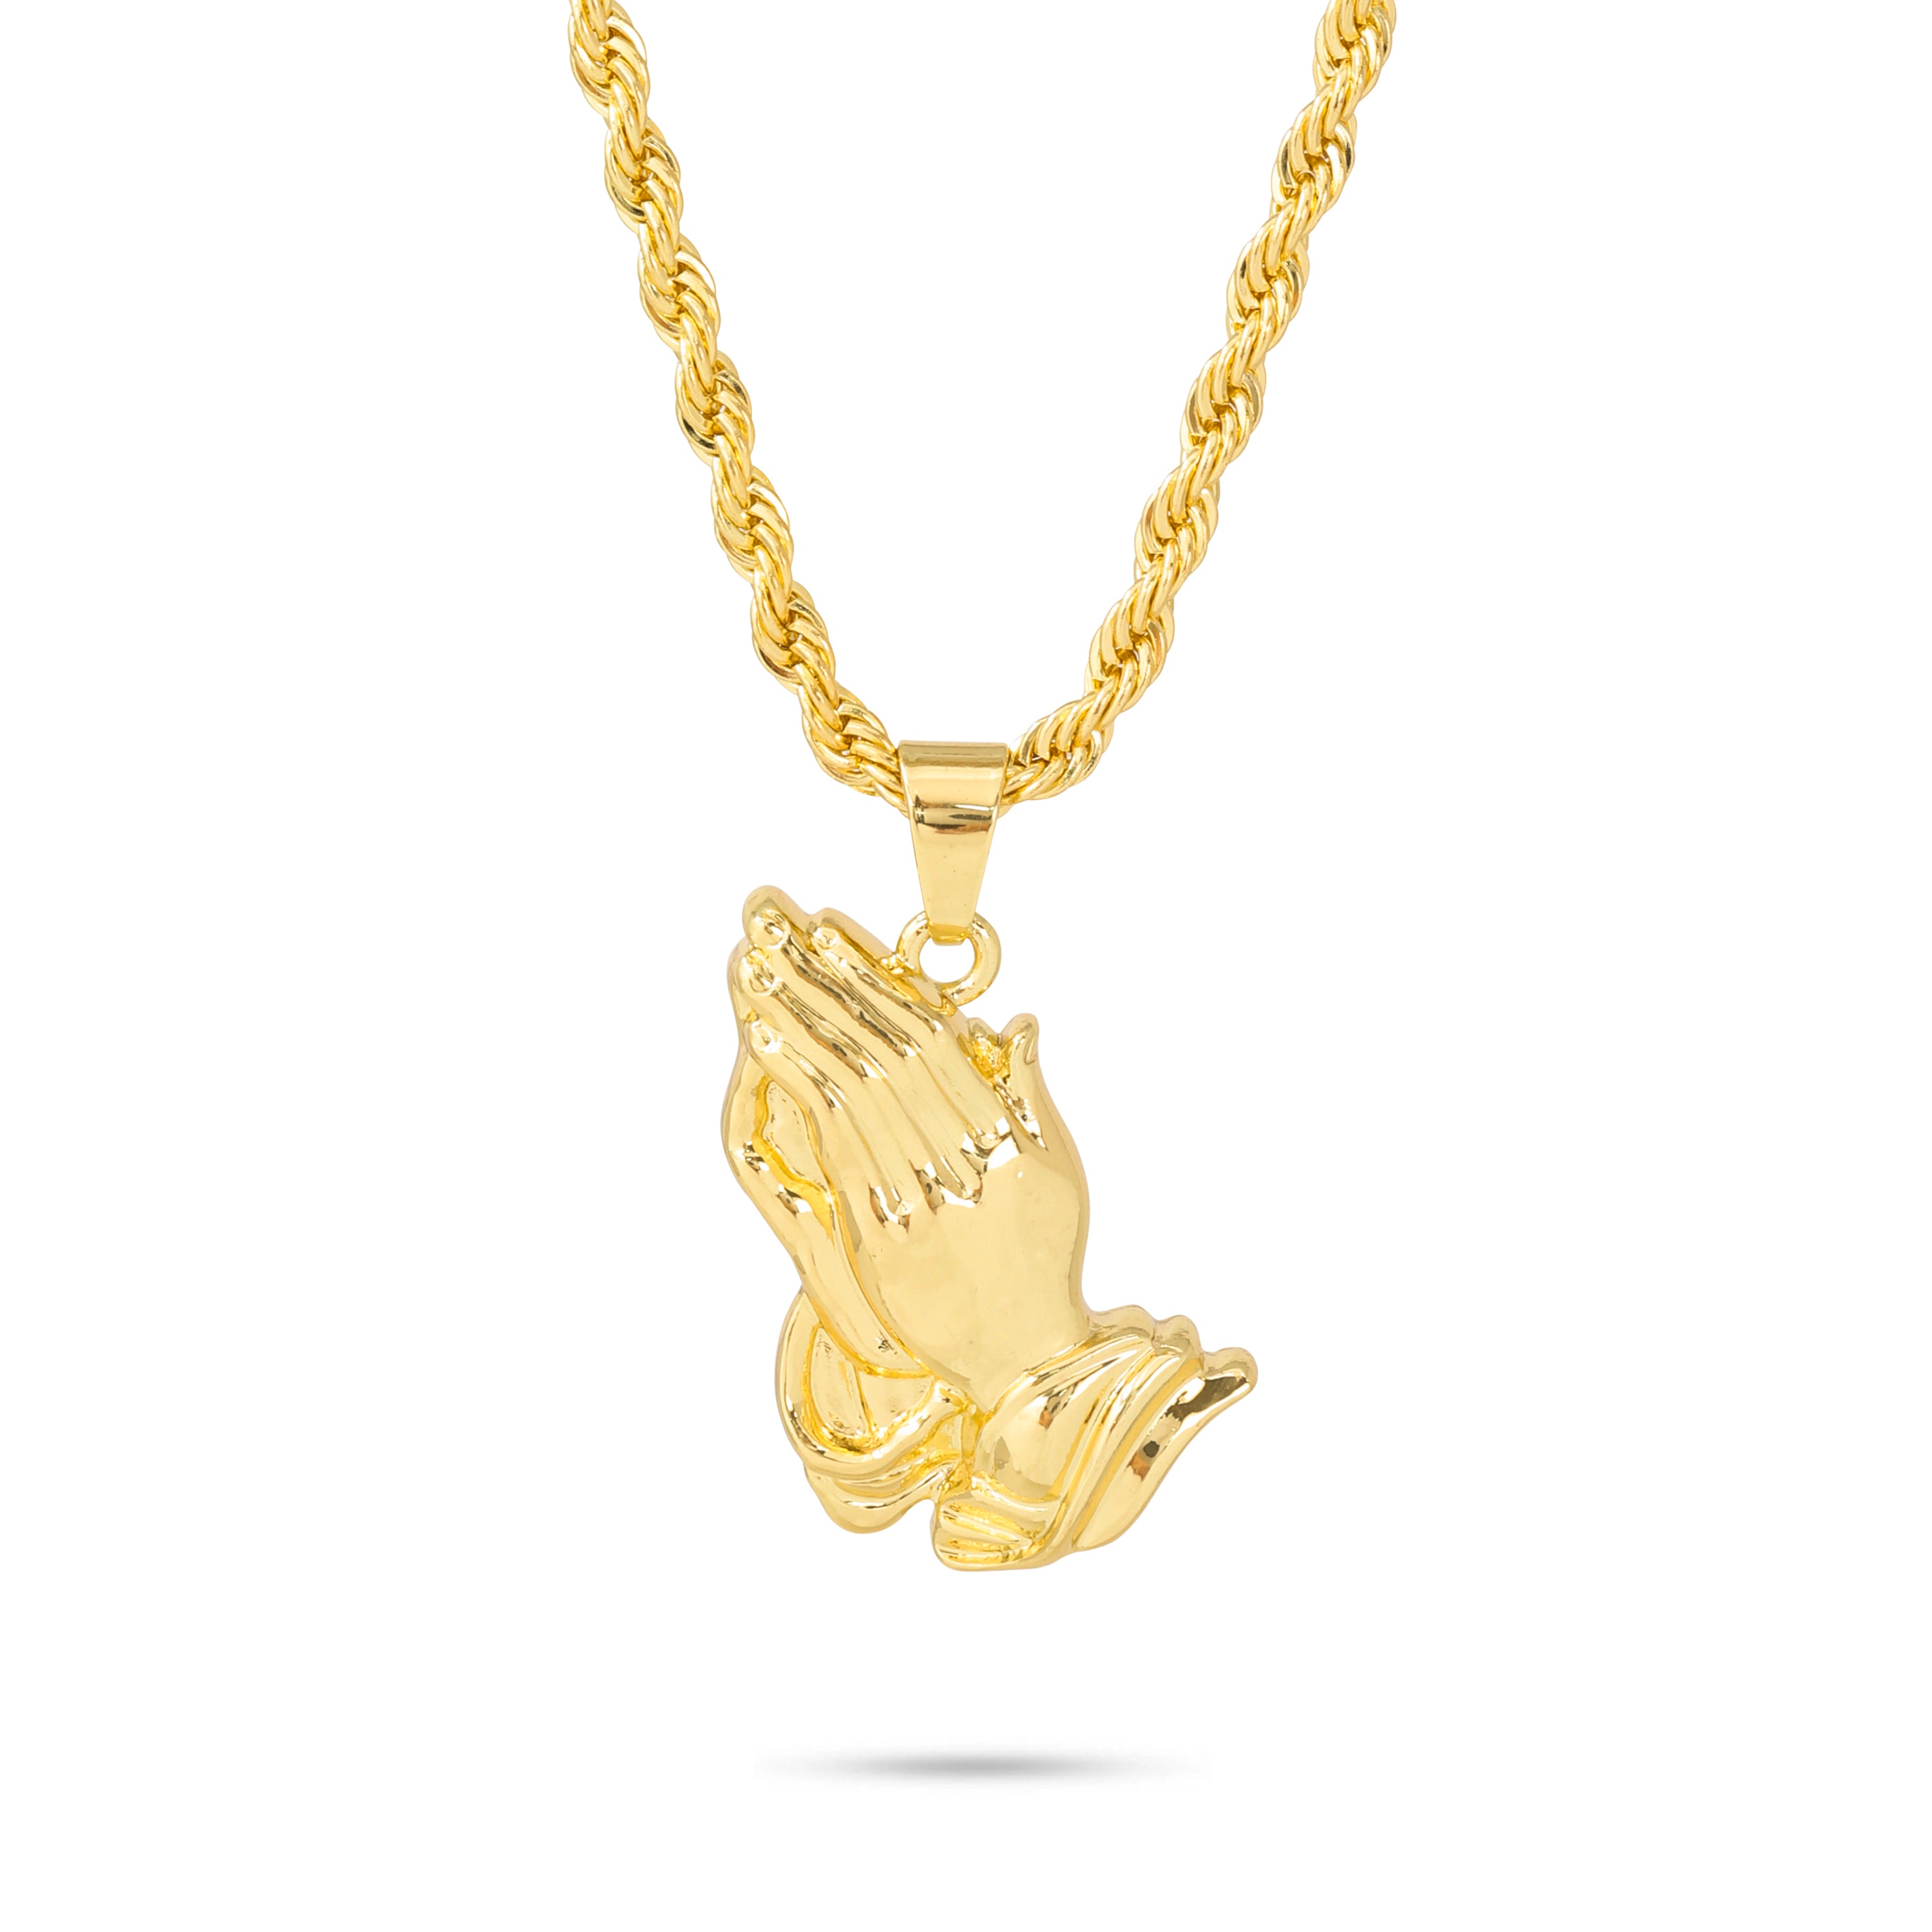 PRAYING HAND NECKLACE GOLD